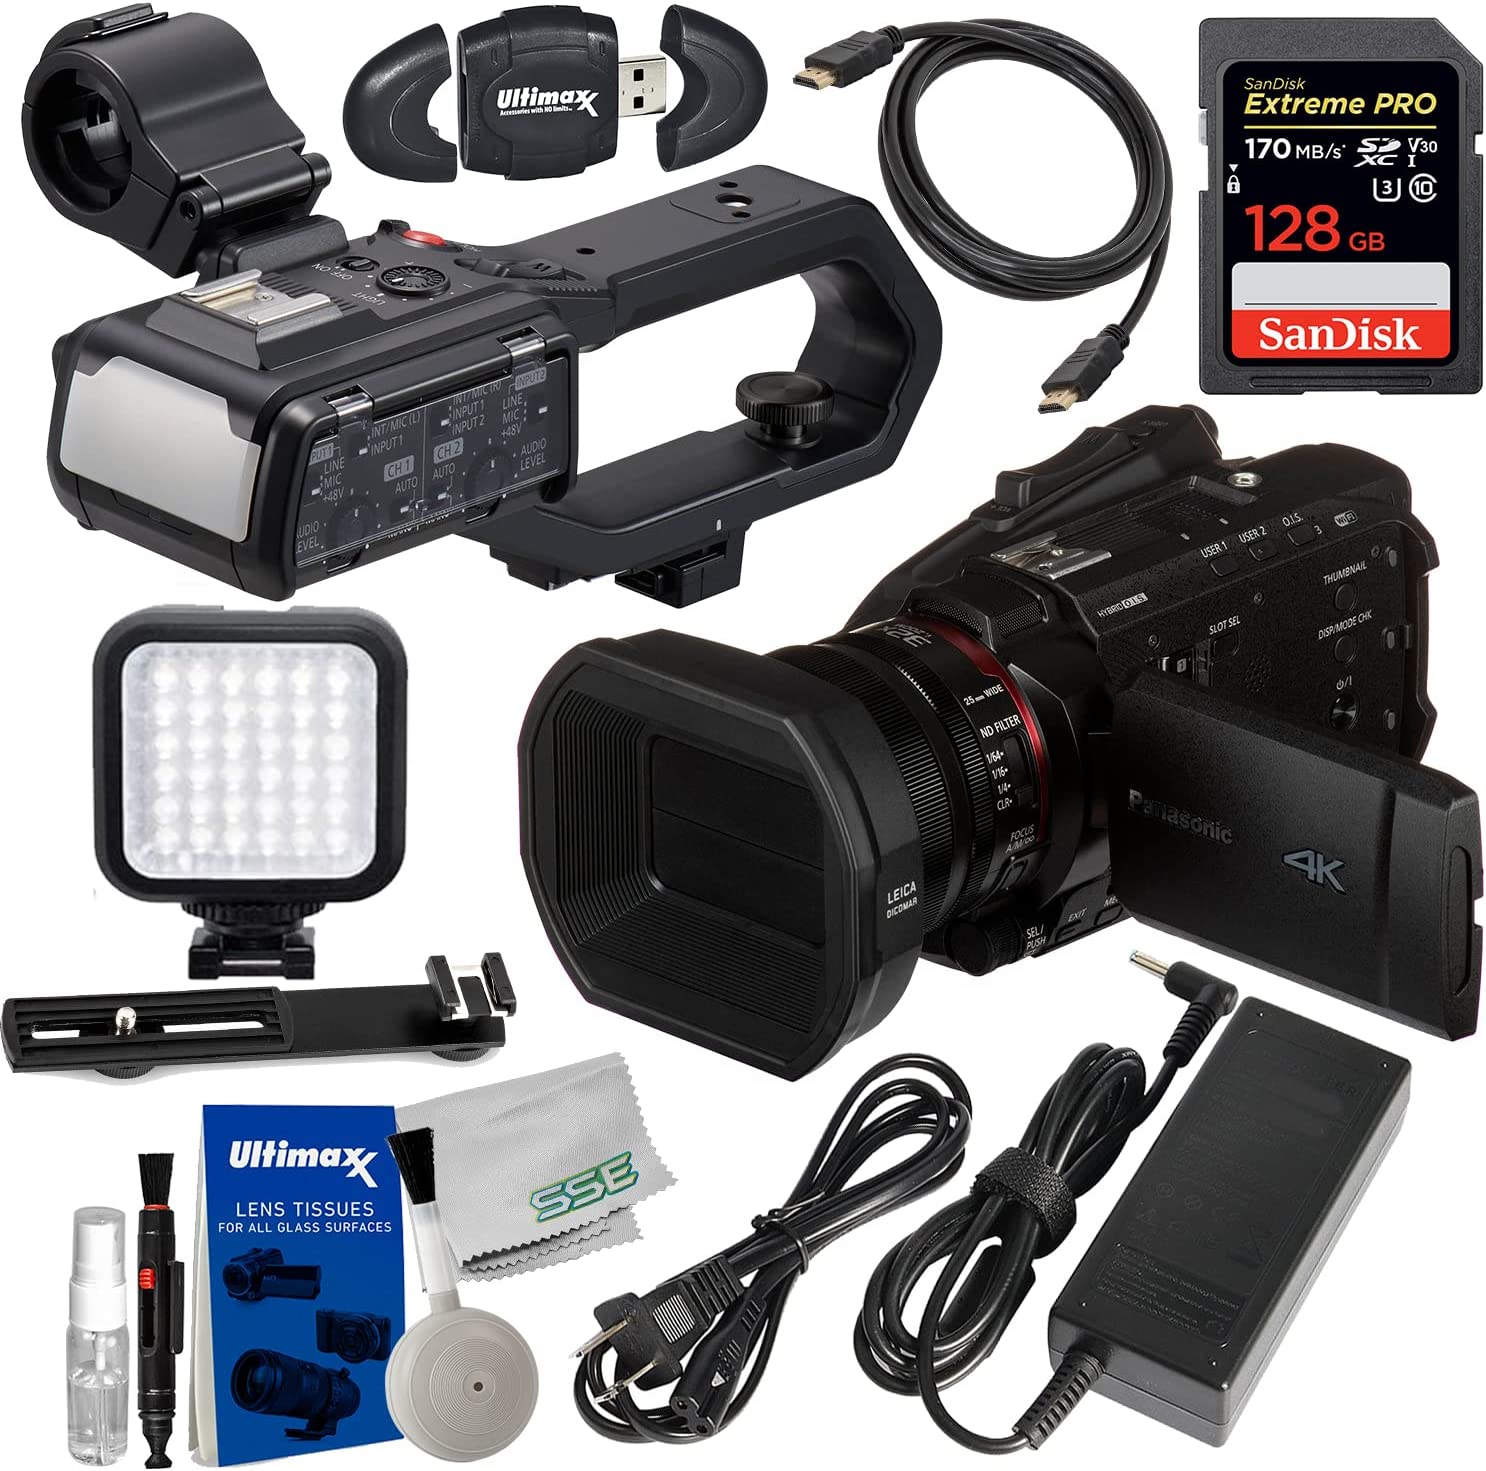 Panasonic HC-X2000 UHD 4K 3G-SDI/HDMI Pro Camcorder + 128GB Memory Card, Rechargeable 36 LED Light with Bracket, 6Ft. HDMI Cable & More (13pc Bundle), (PAHCX2000BB2)